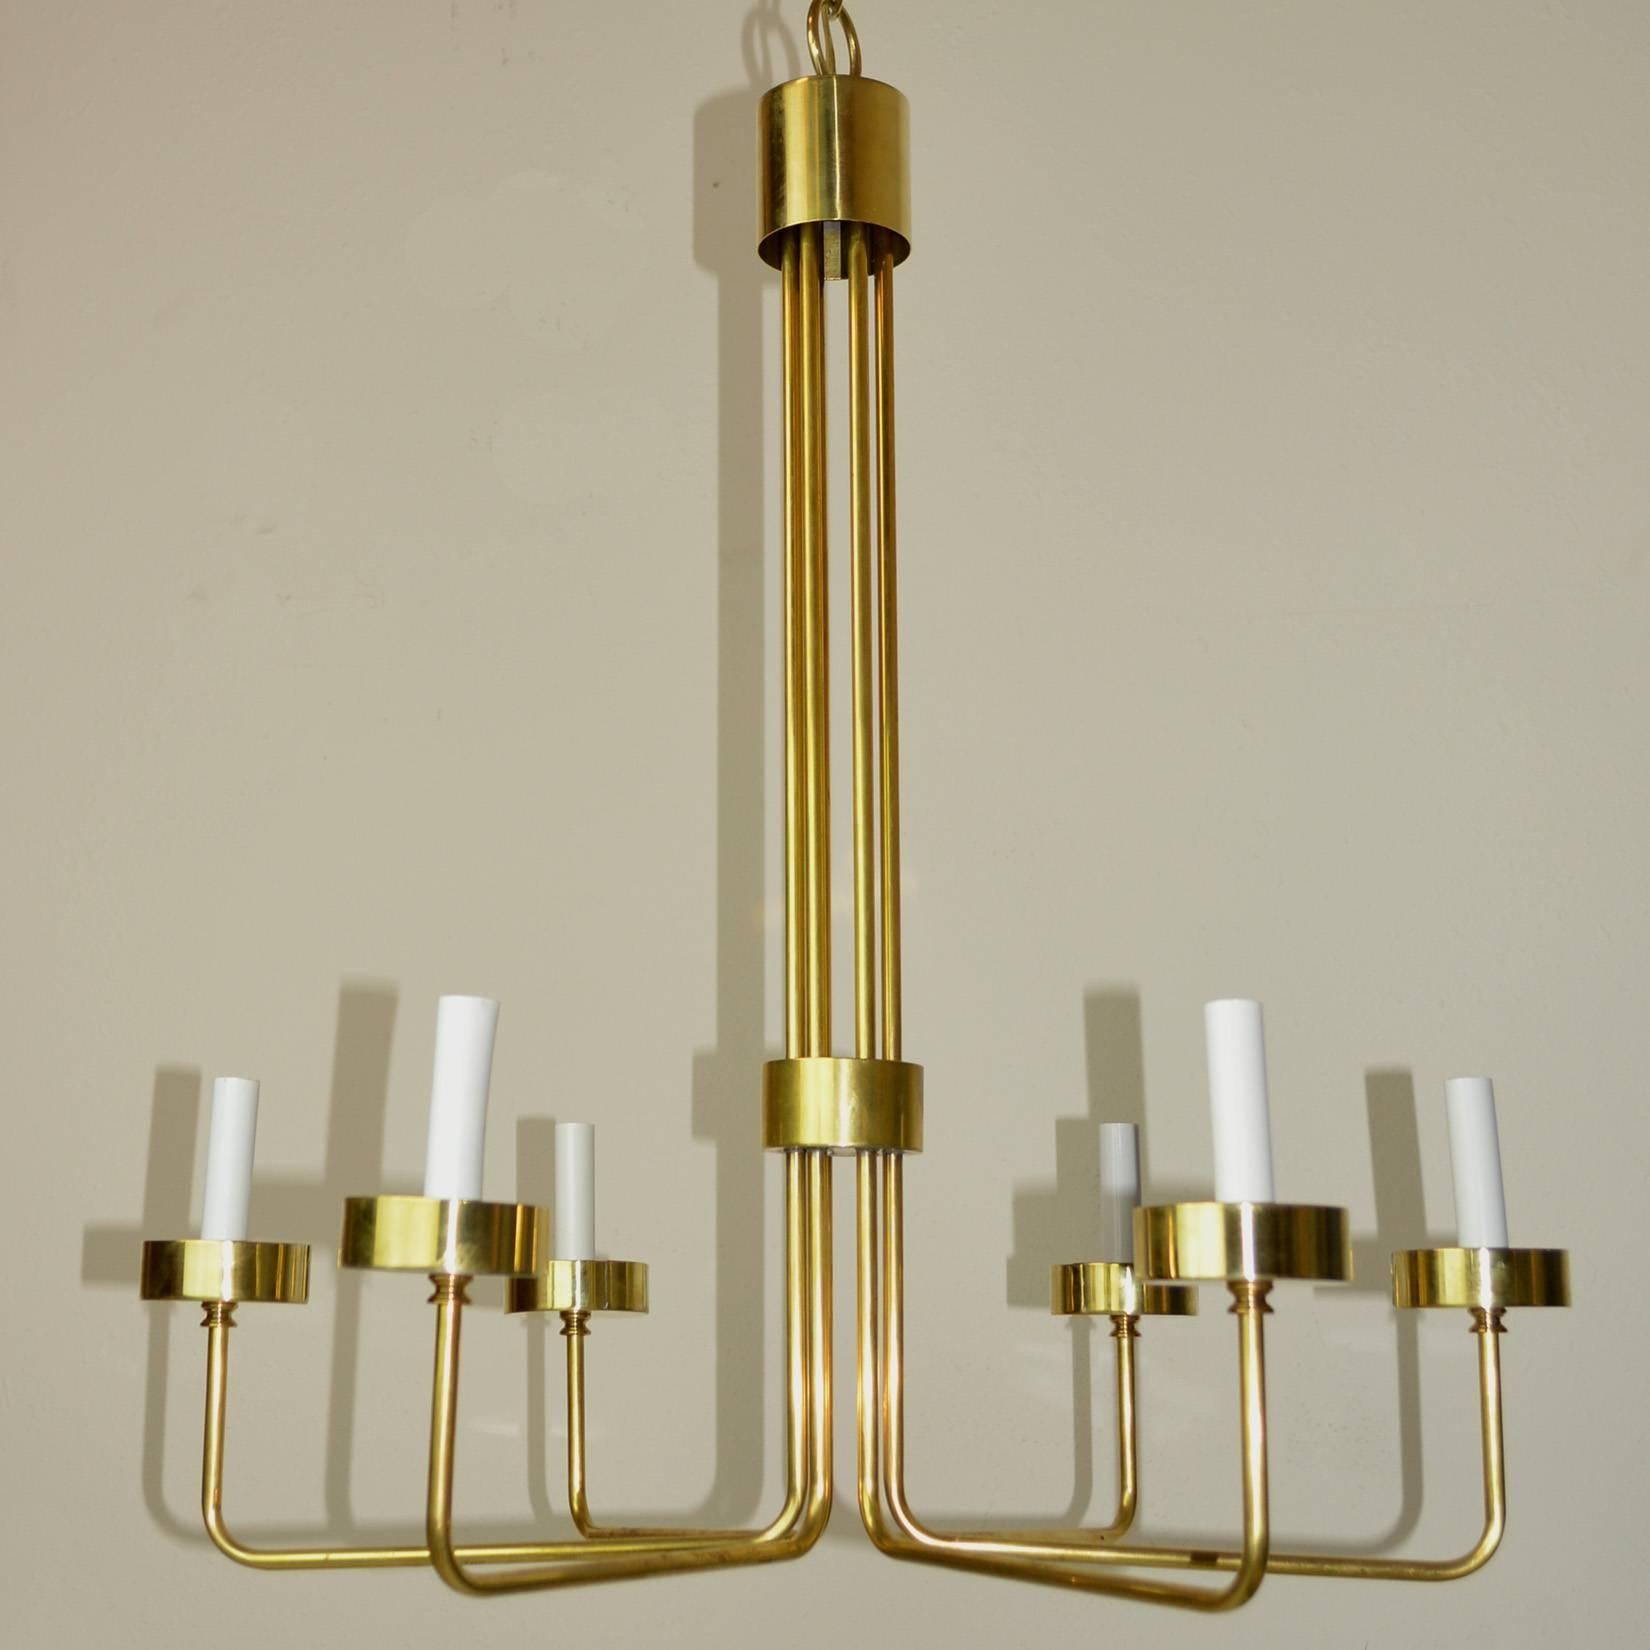 A Minimalist angular six-light chandelier. Six brass rods form a central group and spread out to each light. Brass bobeche cap each rod. In the style of Solaris.